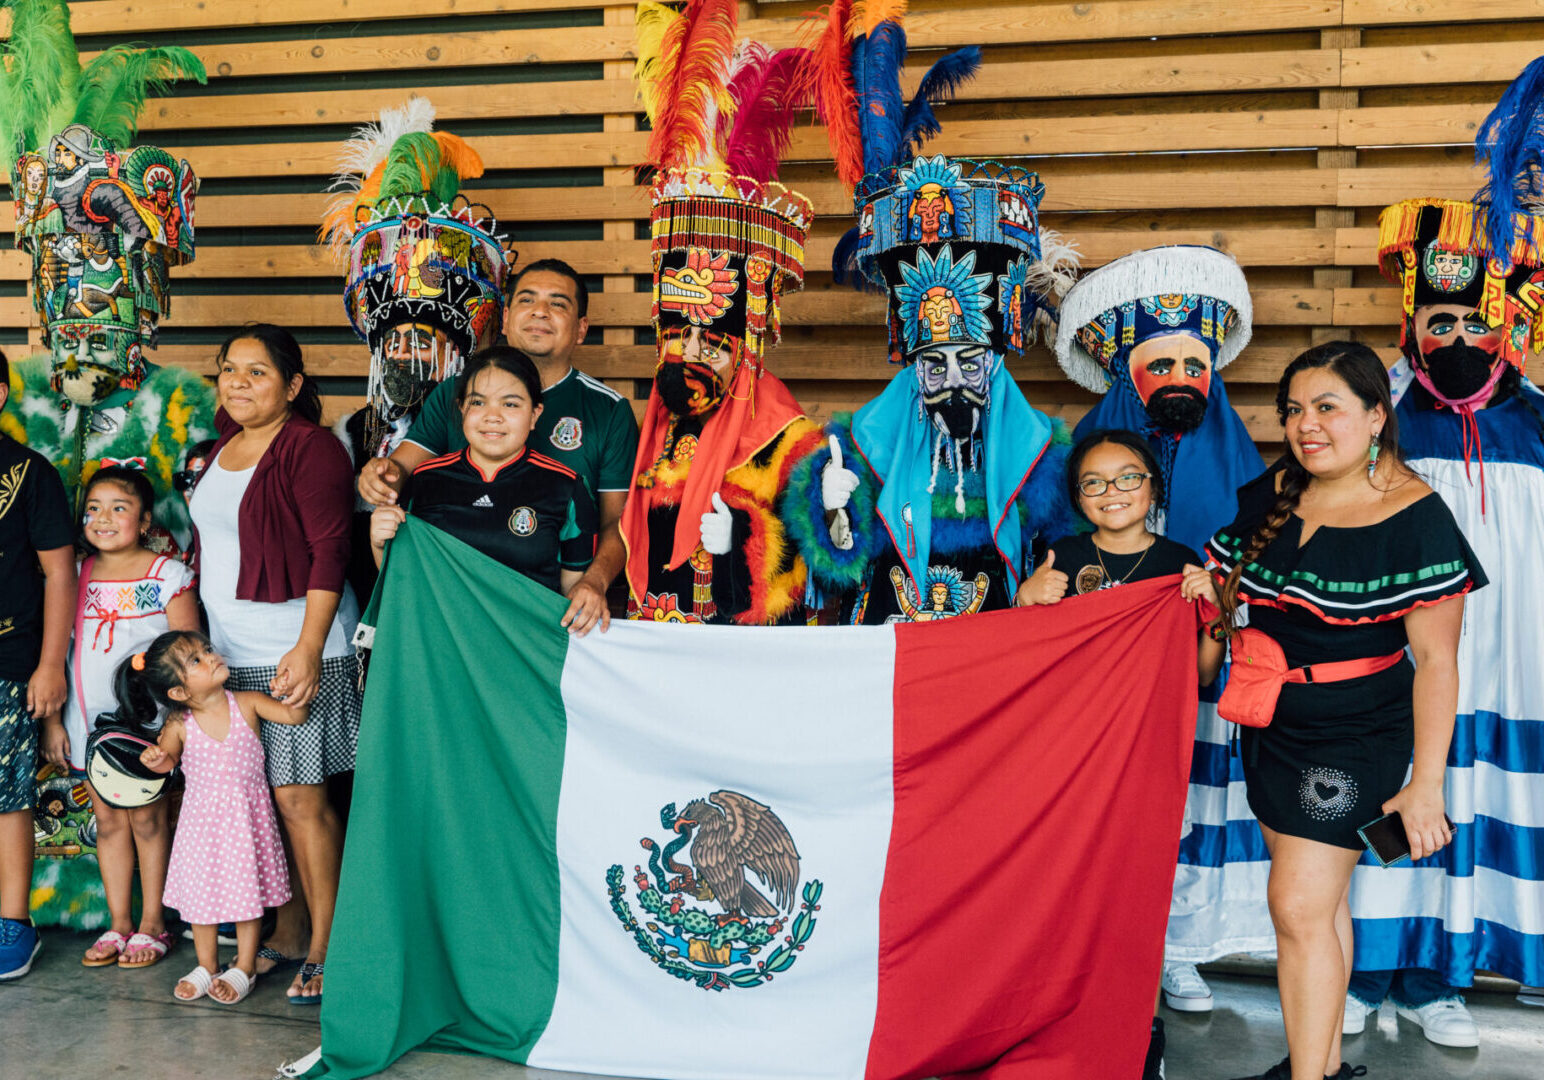 A group of people in costumes holding an mexican flag.